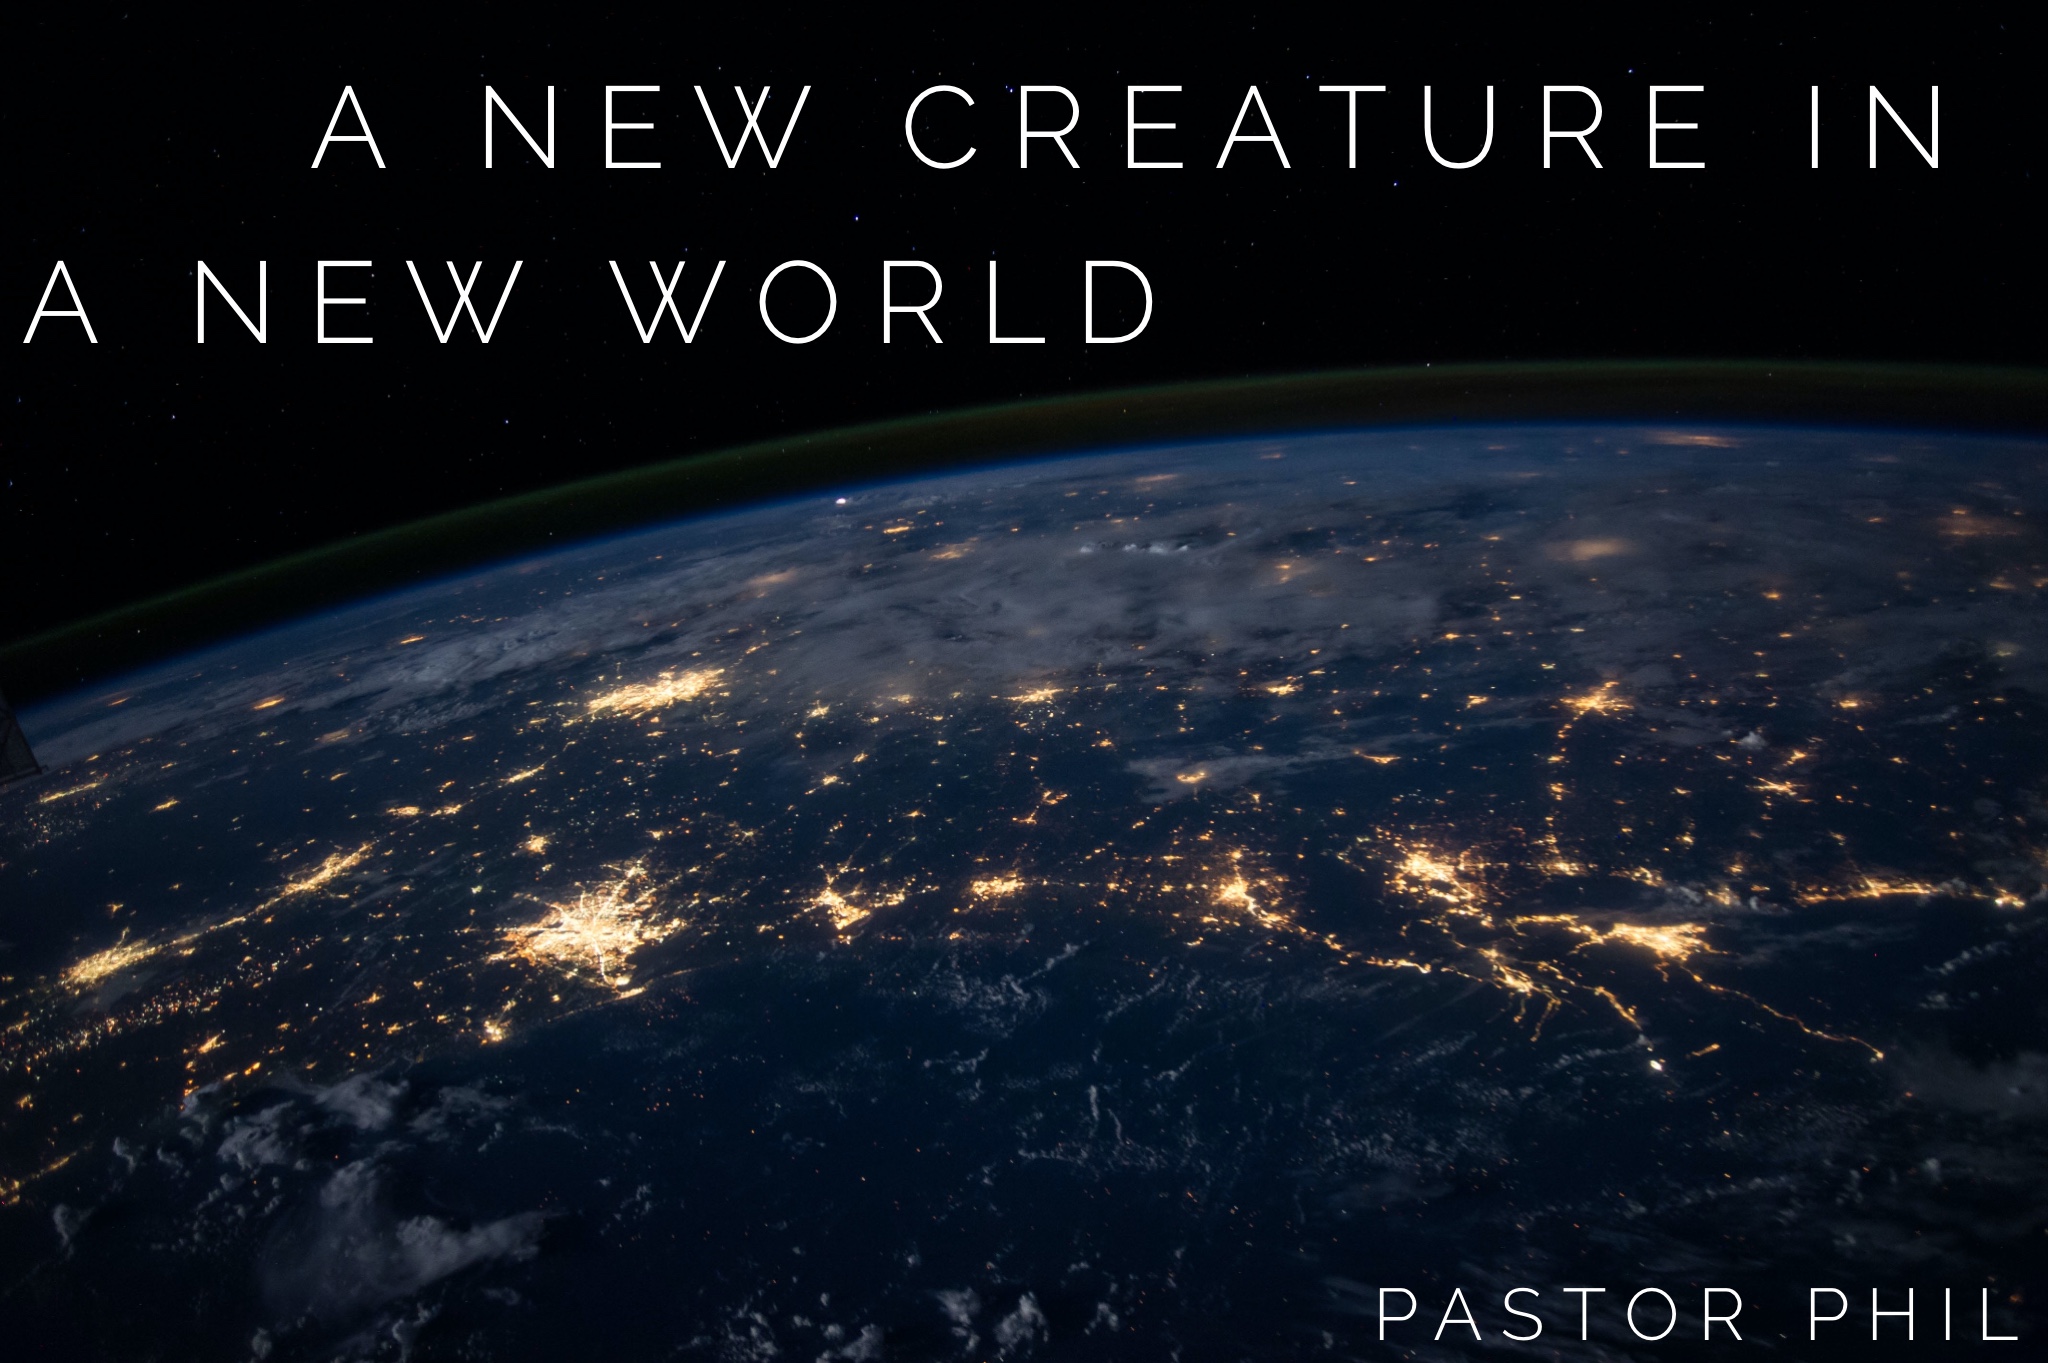 A New Creature in a New World